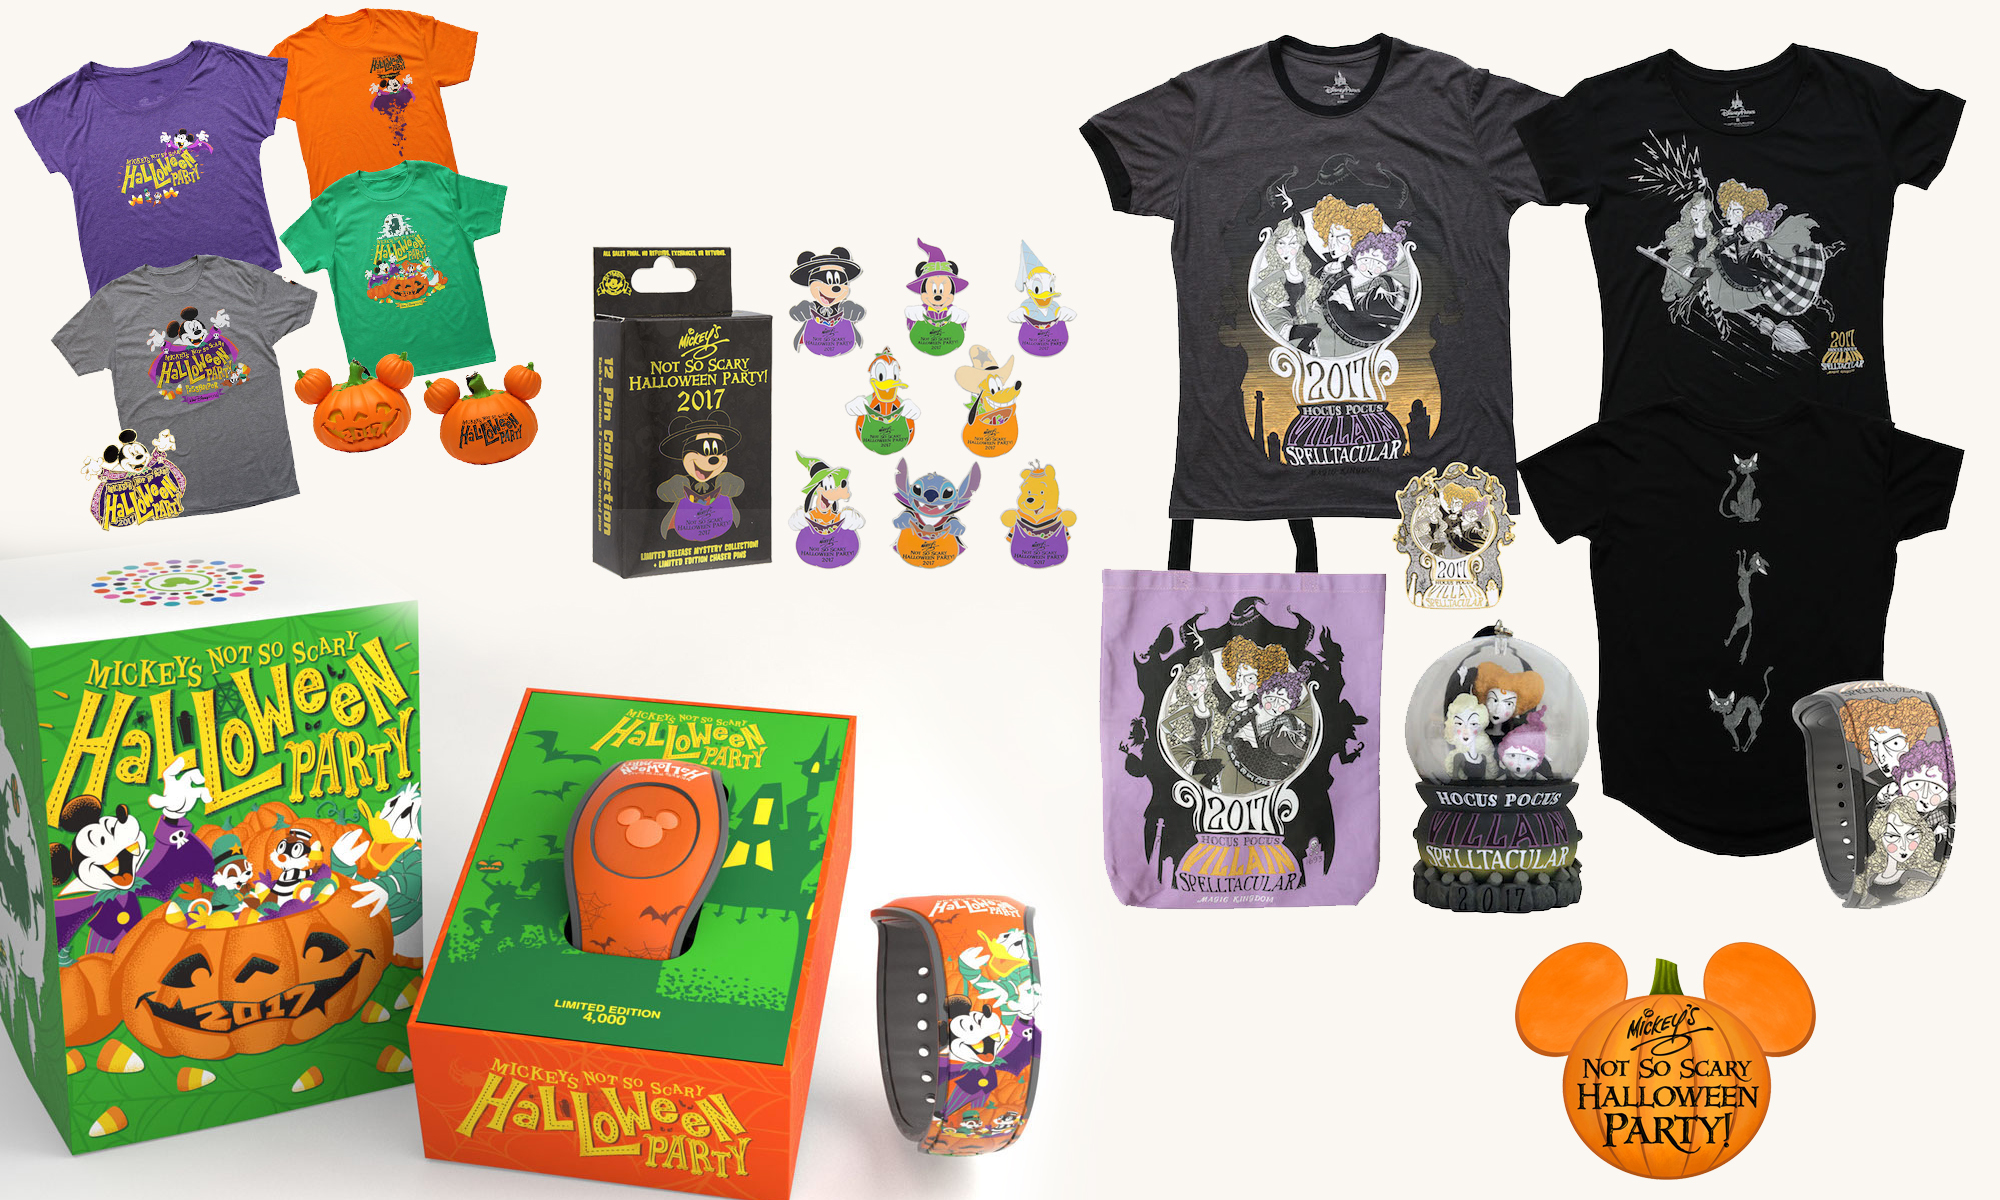 Mickey's Not-So-Scary Halloween Party Merchandise 2017